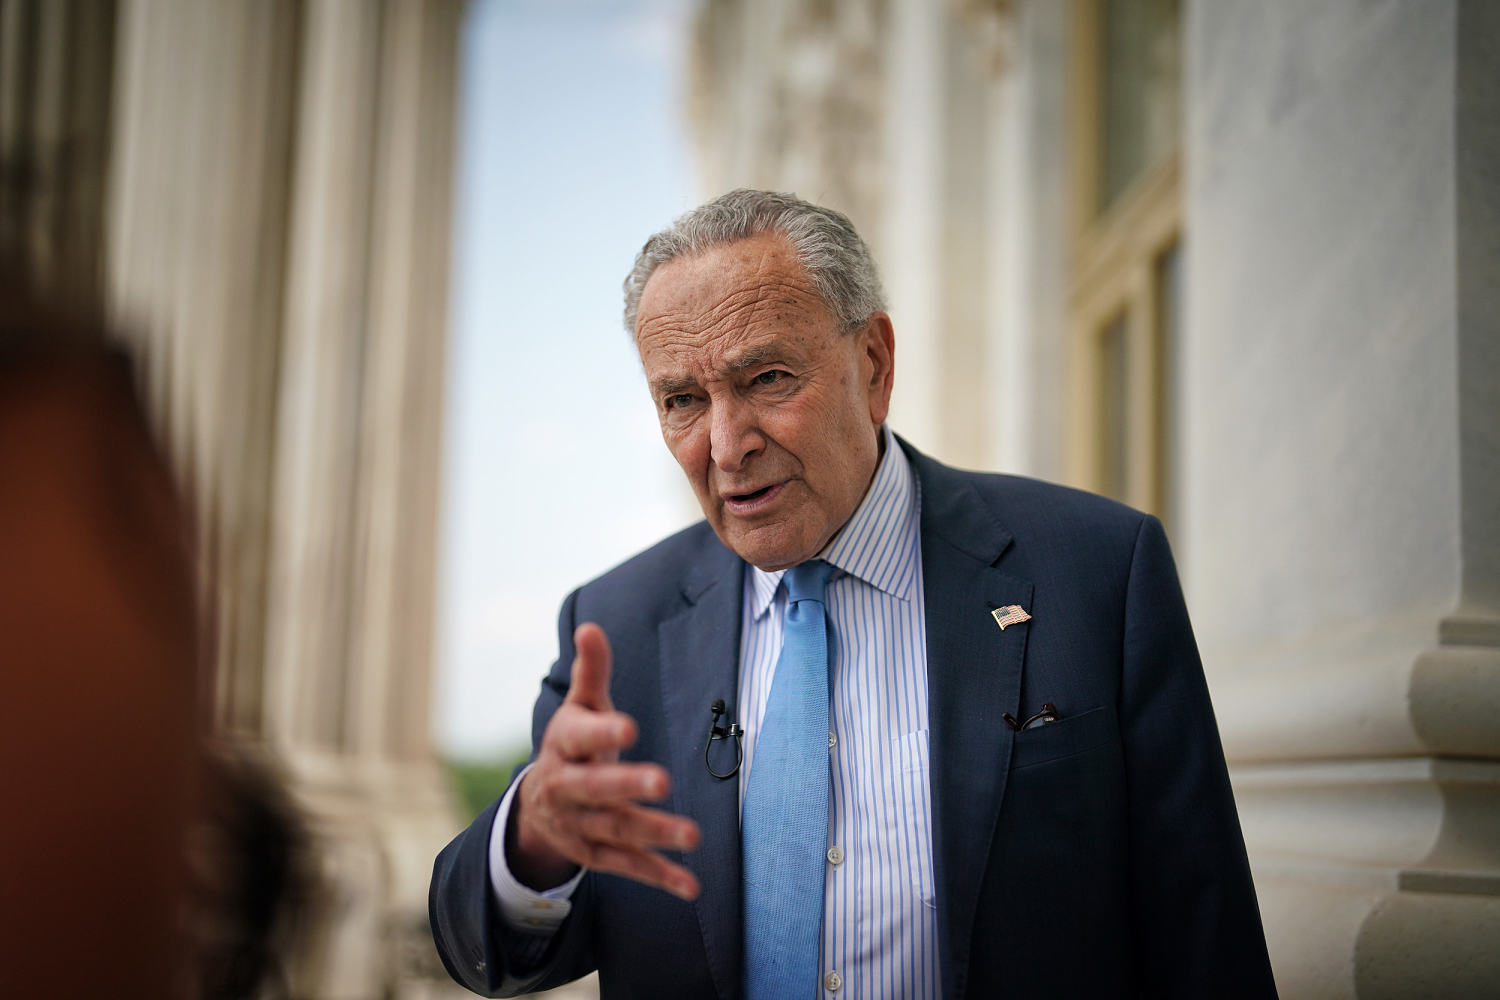 Chuck Schumer eyes opportunities to pass deepfake and AI bills as 2024 elections near